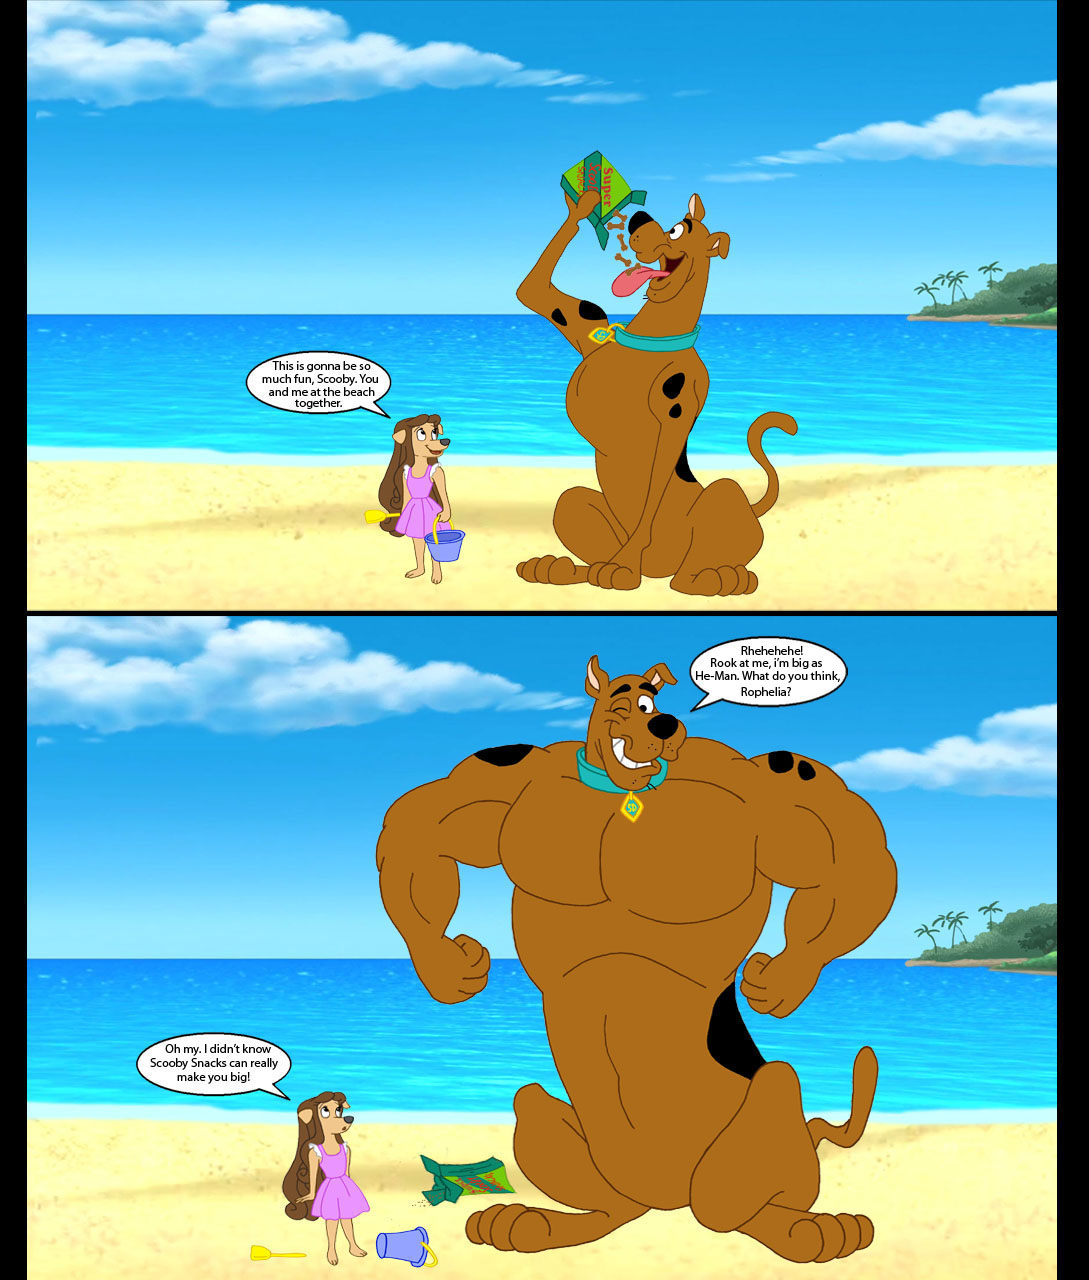 Scrappy doo muscle growth - published by: He can't be bigger than that...